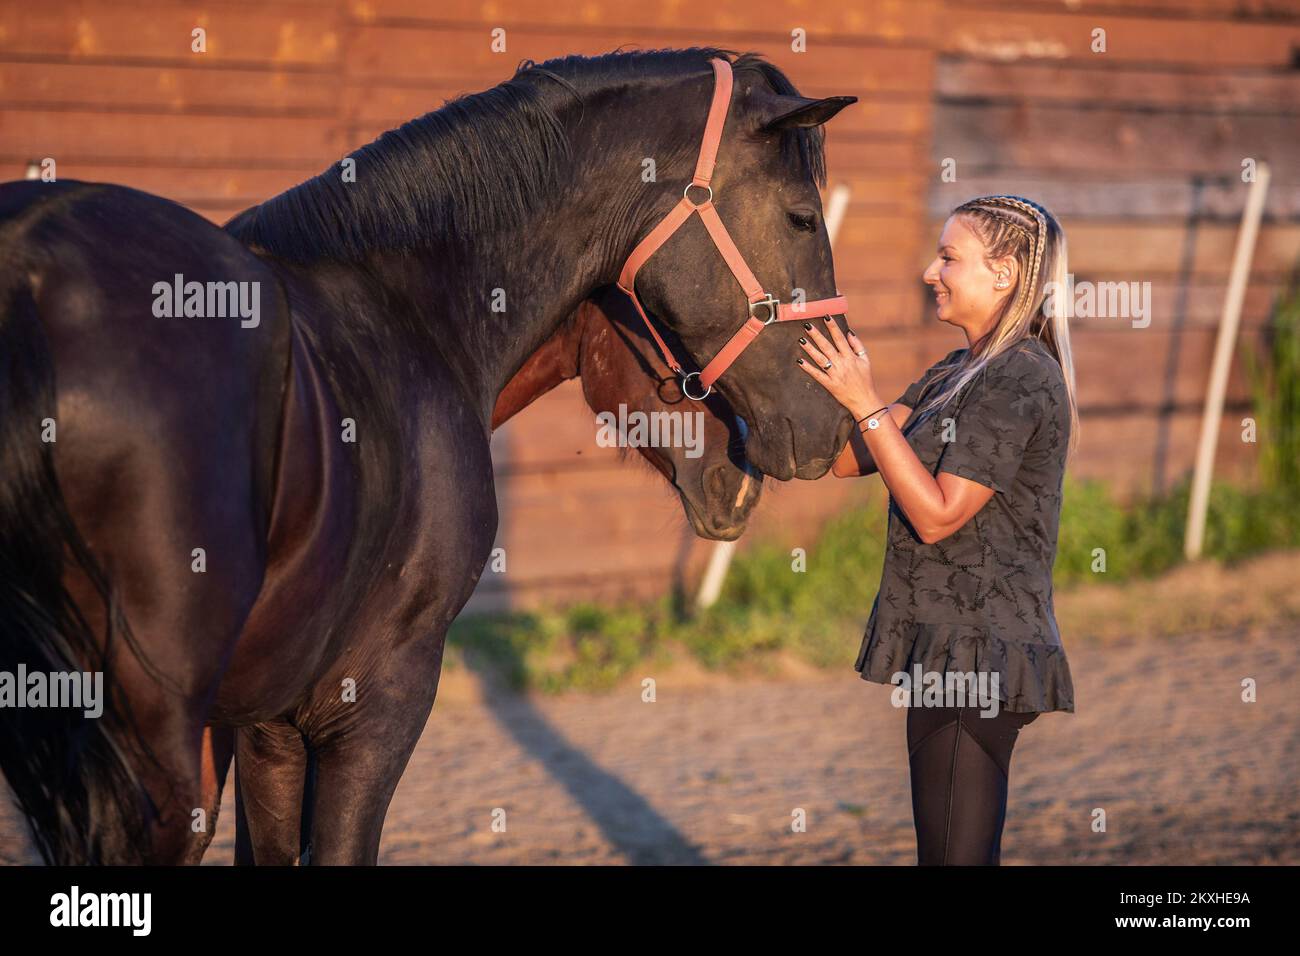 Ranch owner Suncica Tijardovic Deze with mare Zita and therapy horse Pero in Osijek, Croatia on July 10, 2020. The mare Zita united Osijek, Slavonia, and even the whole of Croatia. Thanks to donations, she was bought from the owner until recently and found a new home on a ranch in the Osijek suburb of Tvrdjavica. She was thus saved from the slaughterhouse. Zita is four years old and is of the Hungarian nonius type, quite rare. The number 1546 is written in the booklet, which means that only 1546 nonius have been registered in Croatia since the beginning of our country. It is a breed that, inte Stock Photo